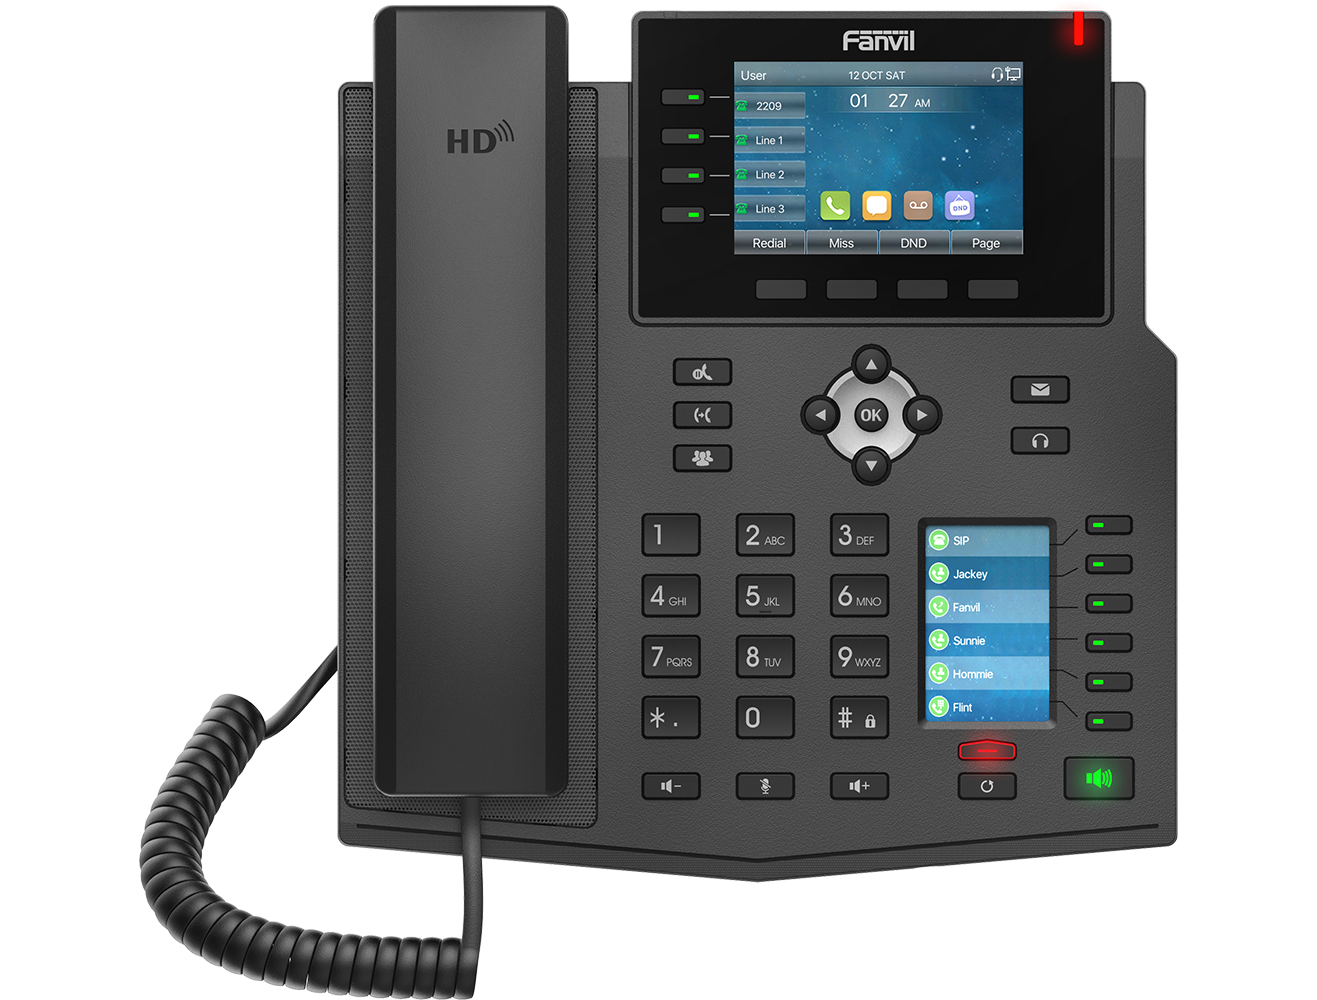 Is the Fanvil X5U-V2 IP Phone capable of functioning as a SIP hotspot?